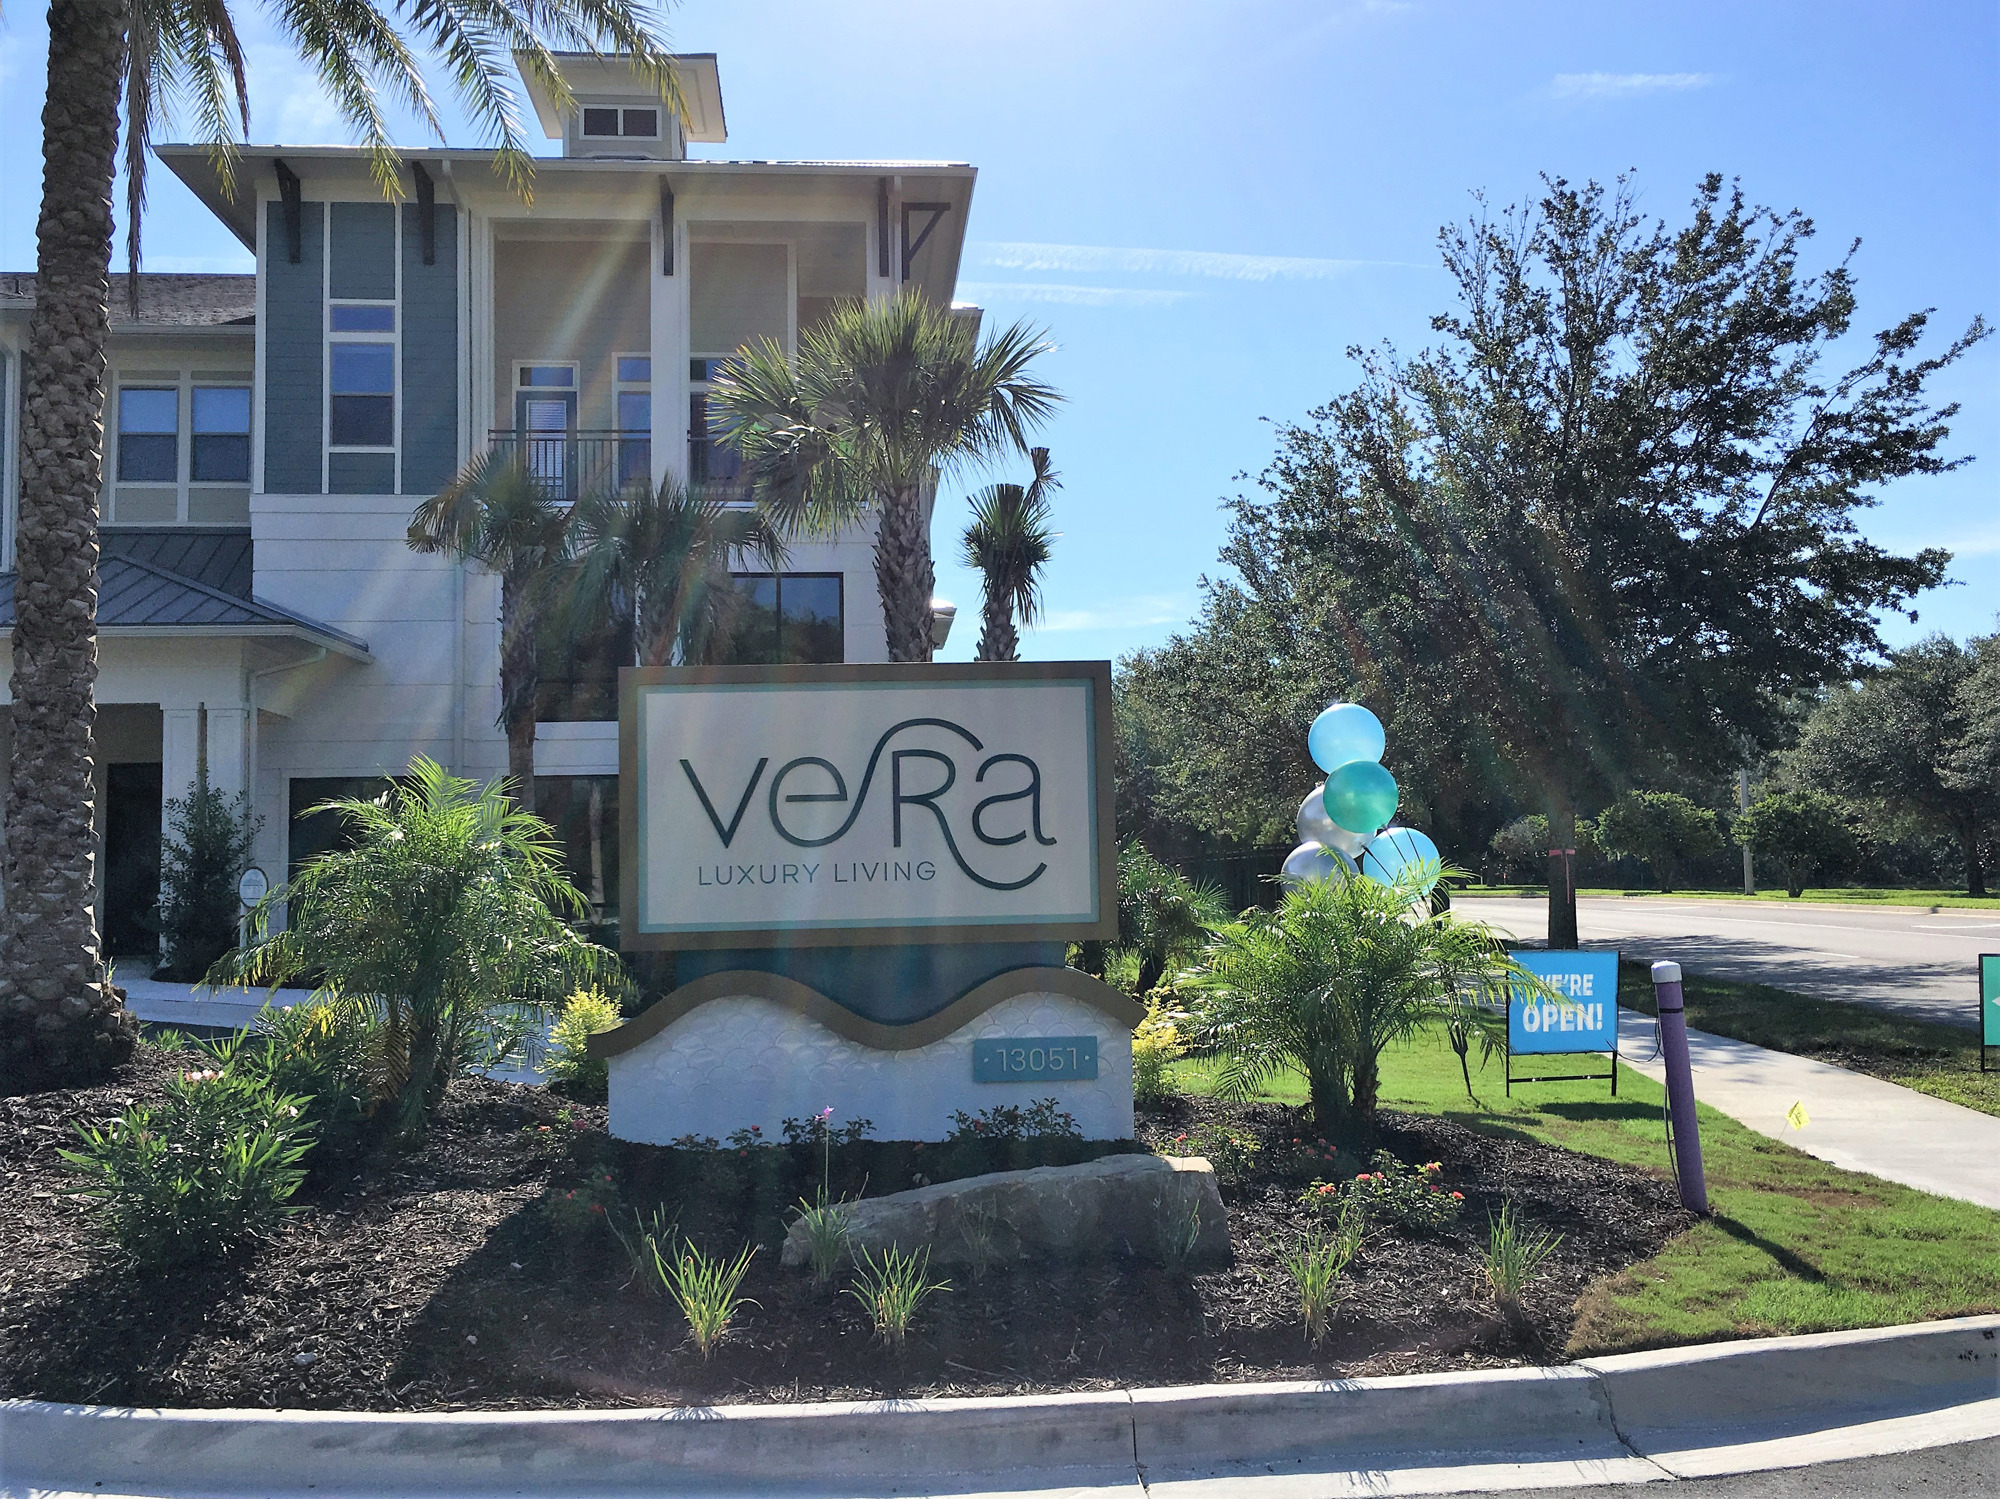 The Vera apartments recently began leasing 252 upscale units on Gran Bay Parkway in the Flagler Center area.